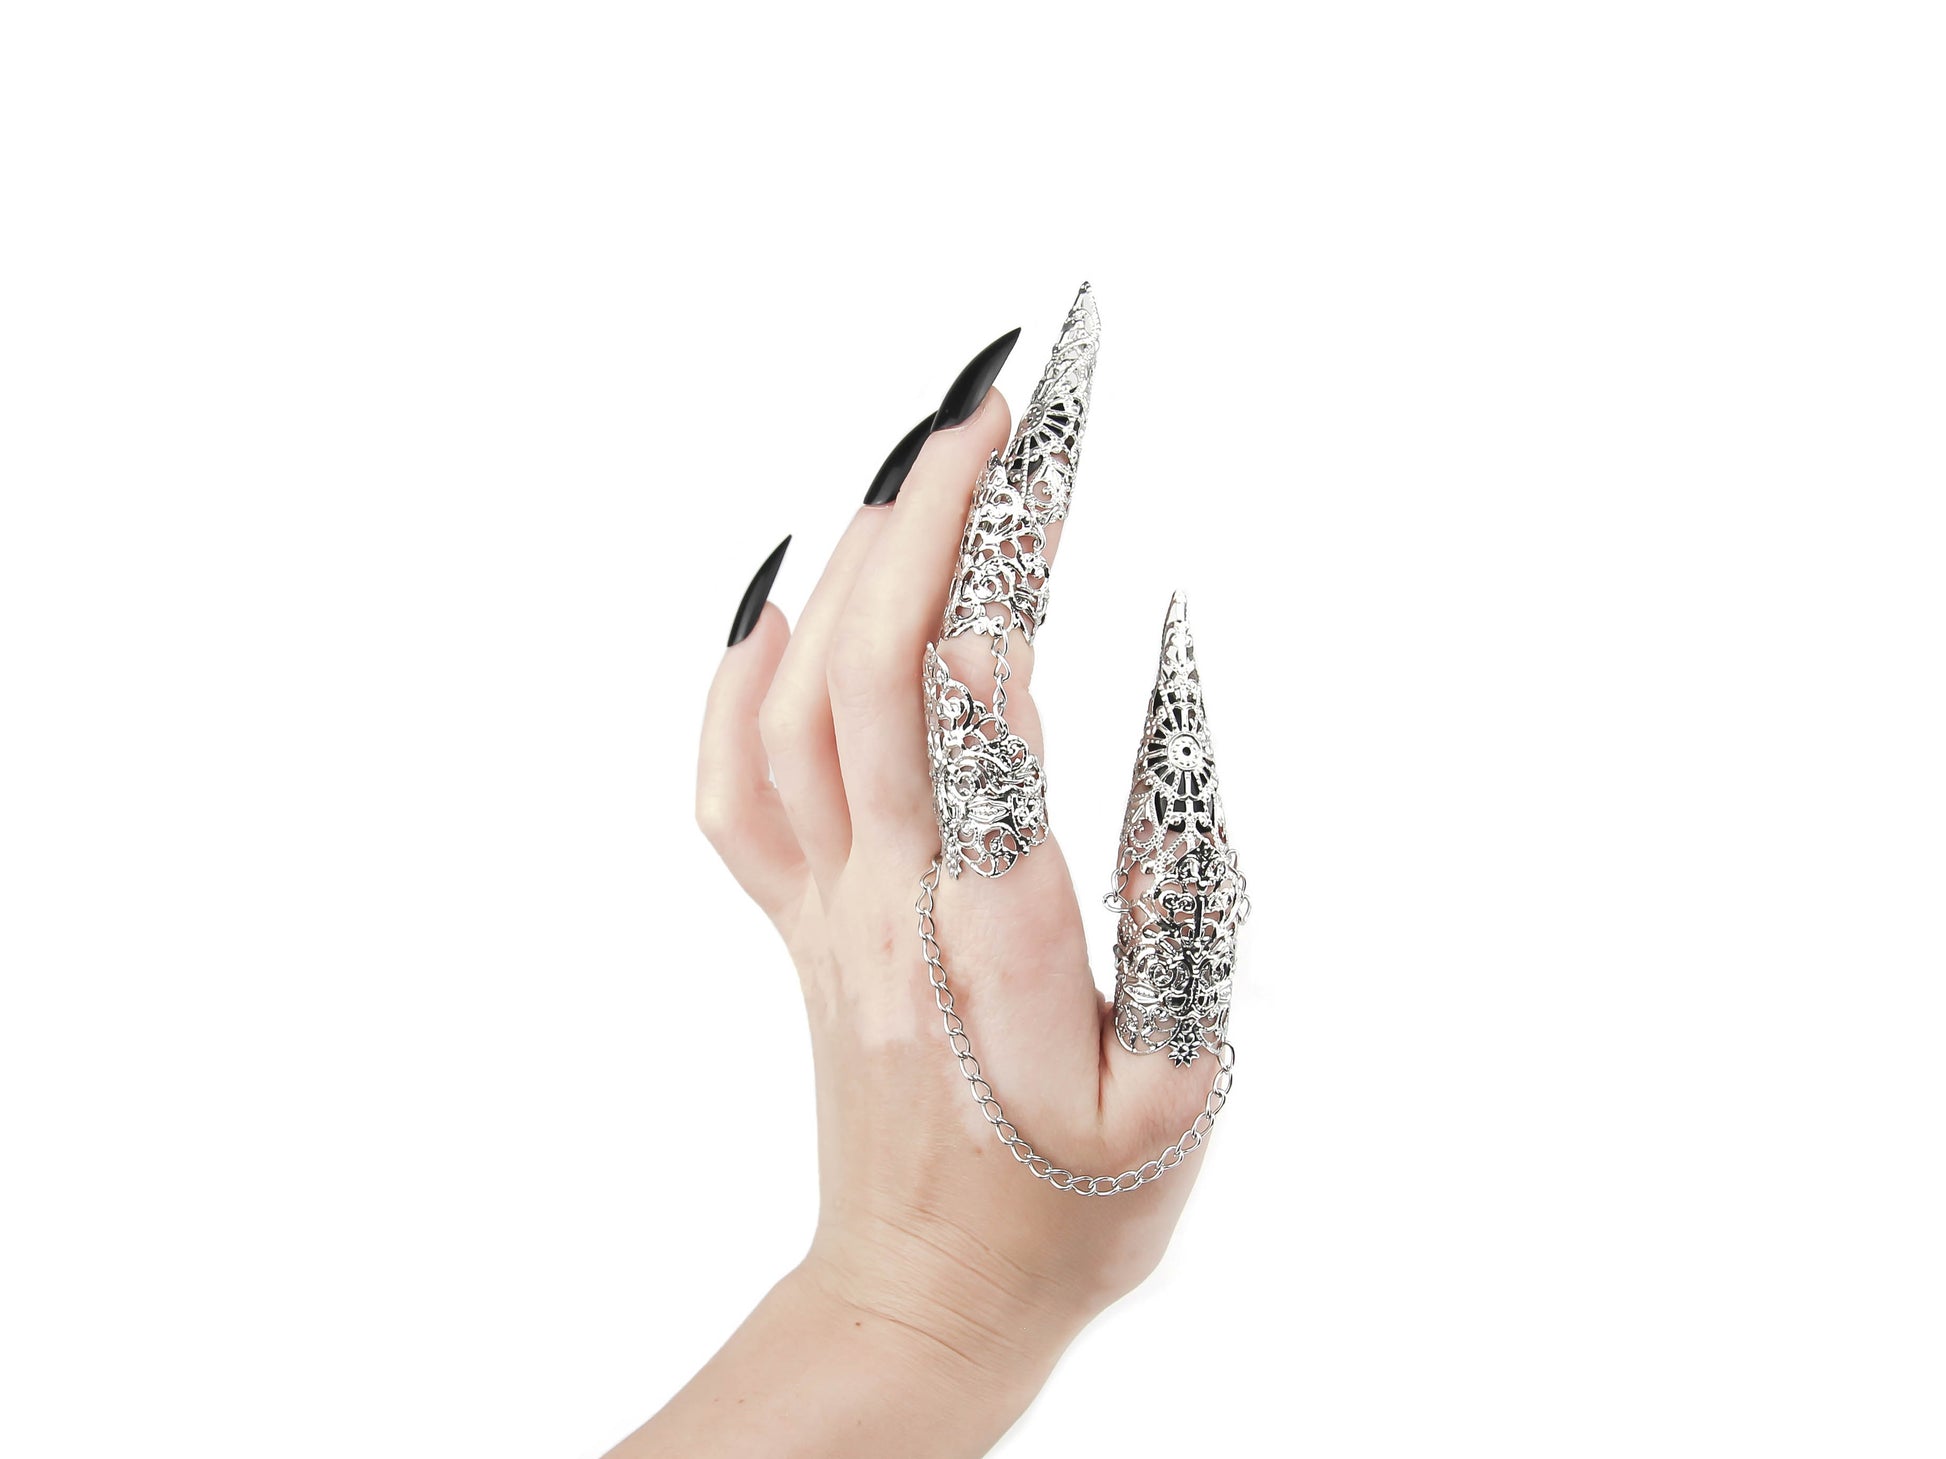 A hand elegantly displays Myril Jewels' gothic full-finger double rings, adorned with intricate silver filigree claws that encapsulate the essence of dark-avantgarde design. This striking piece of claw rings is a hallmark of neo-gothic jewelry, seamlessly blending with the wearer's black manicure to appeal to enthusiasts of gothic-chic, whimsigoth, and witchcore styles. It's an audacious choice for those seeking a bold statement at Halloween events, rave parties